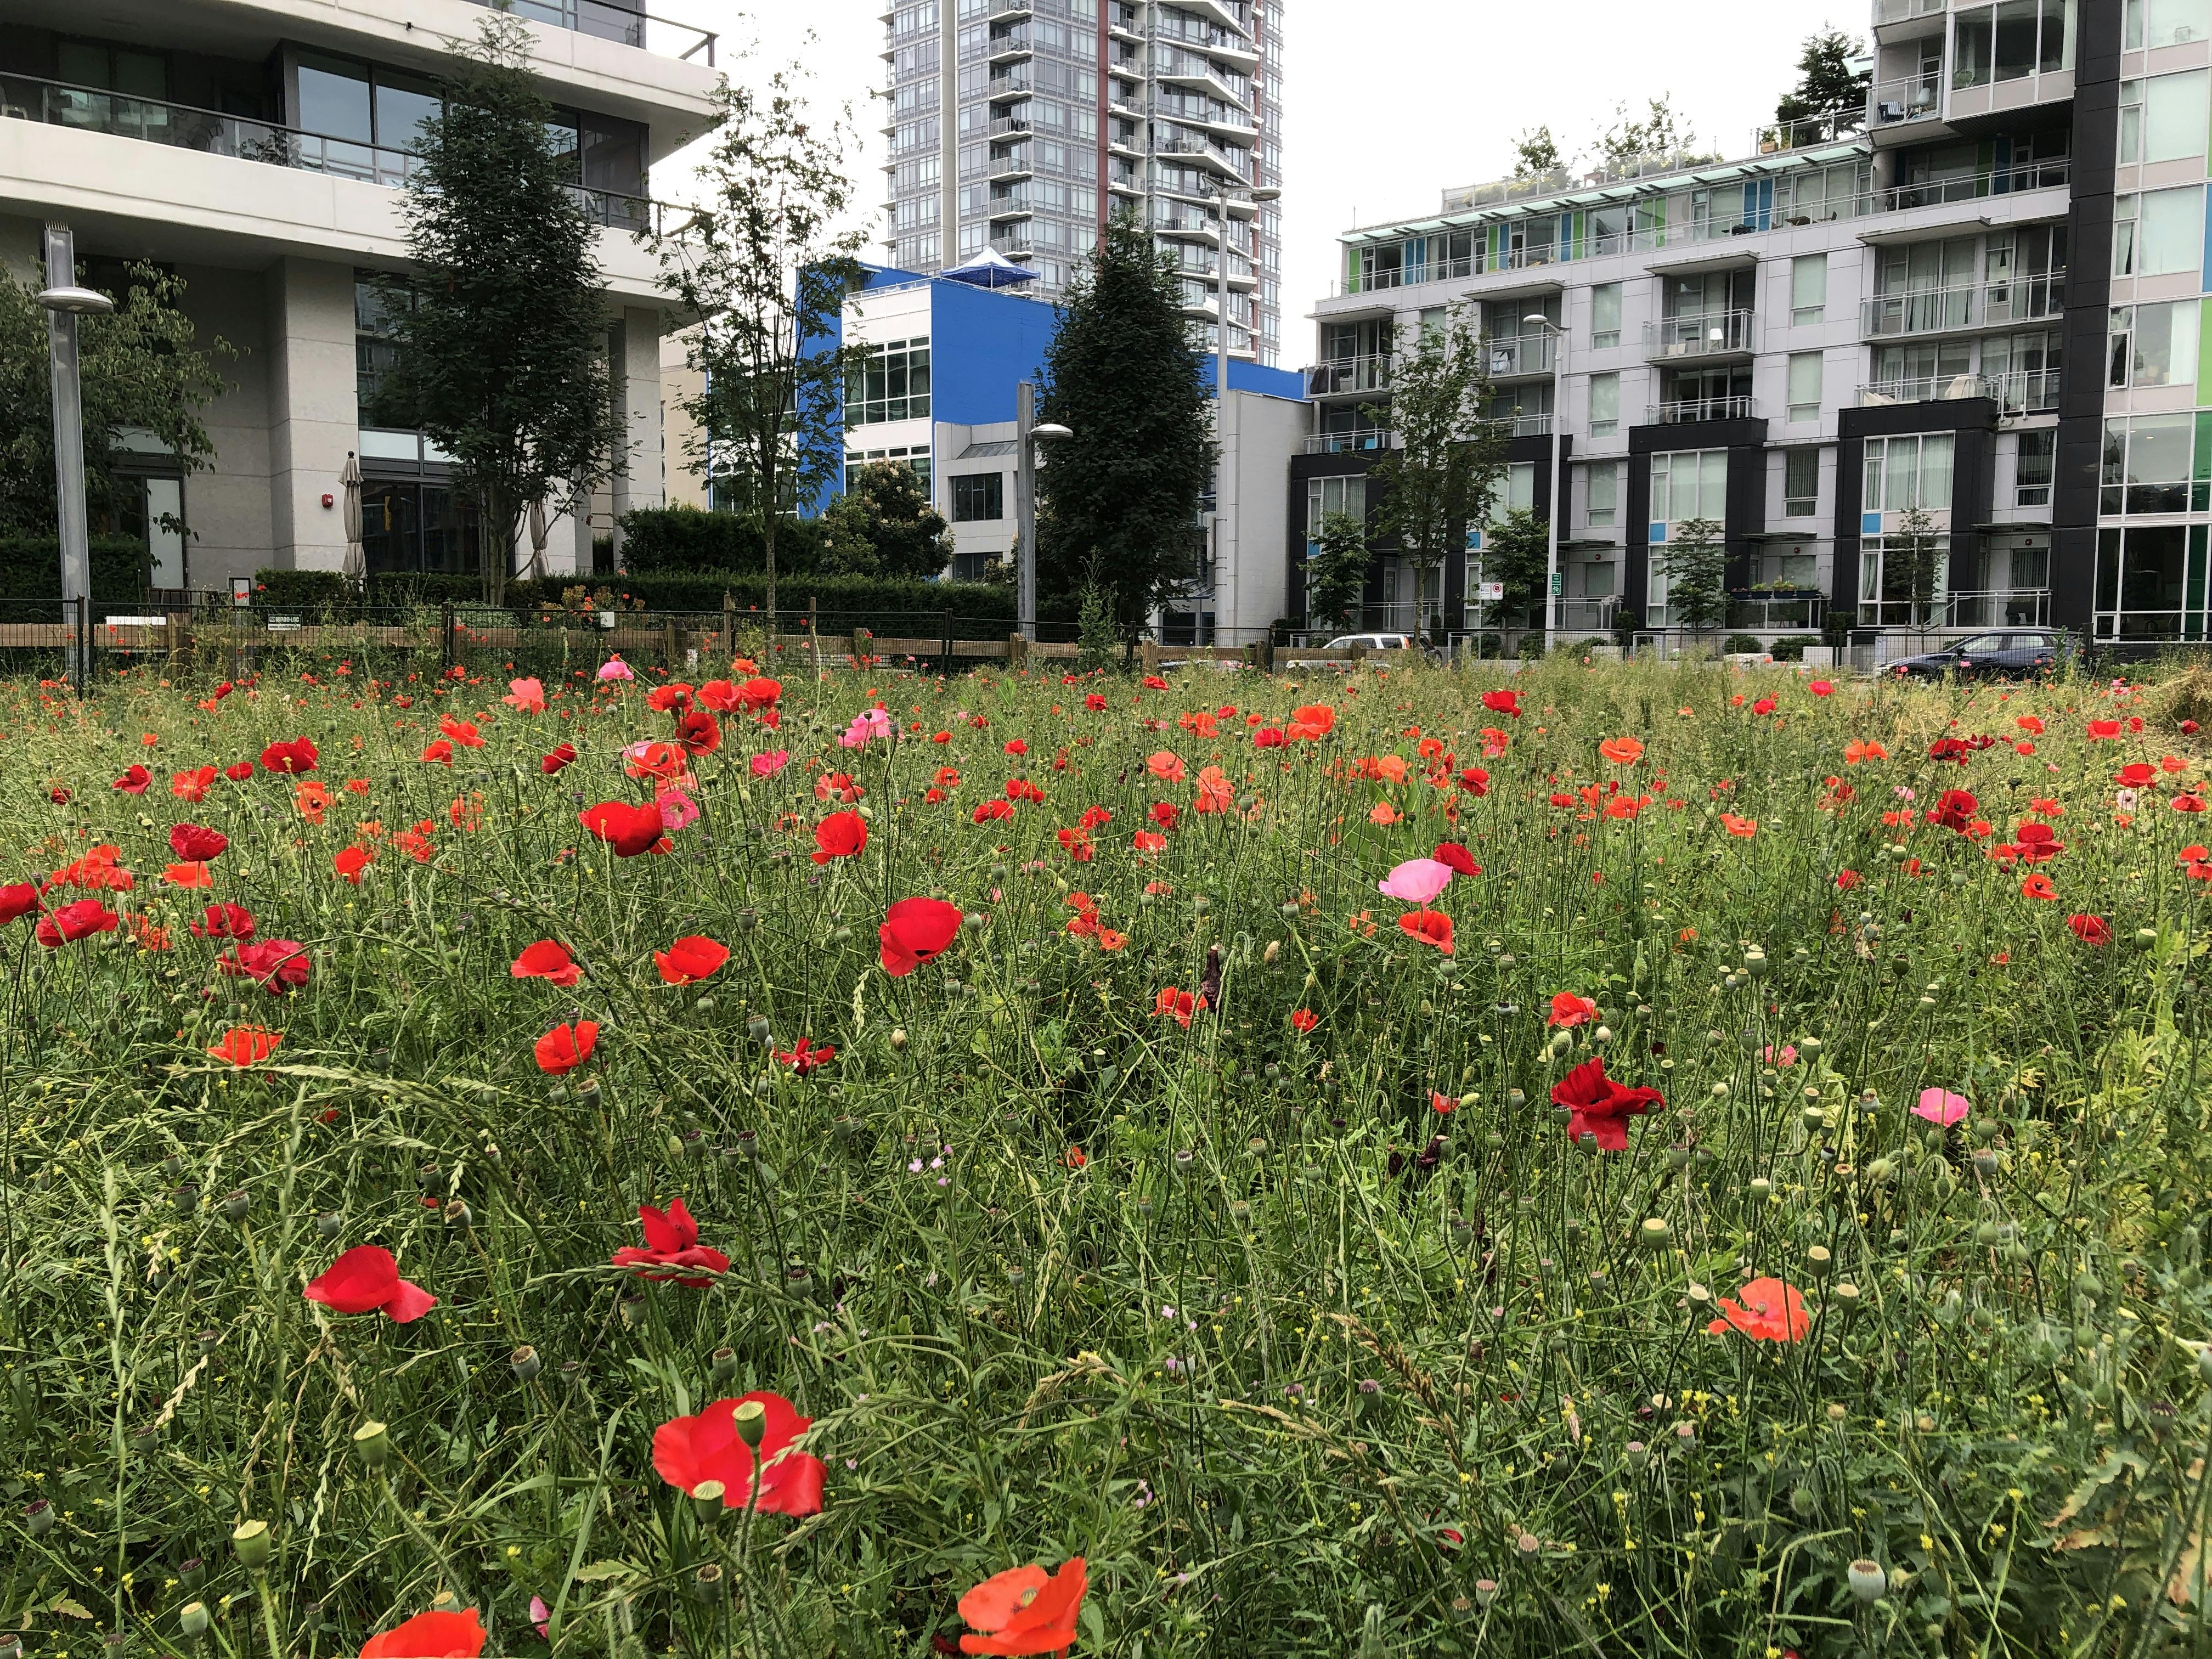 East Park Temporary Pollinator Meadow - July 15, 2022